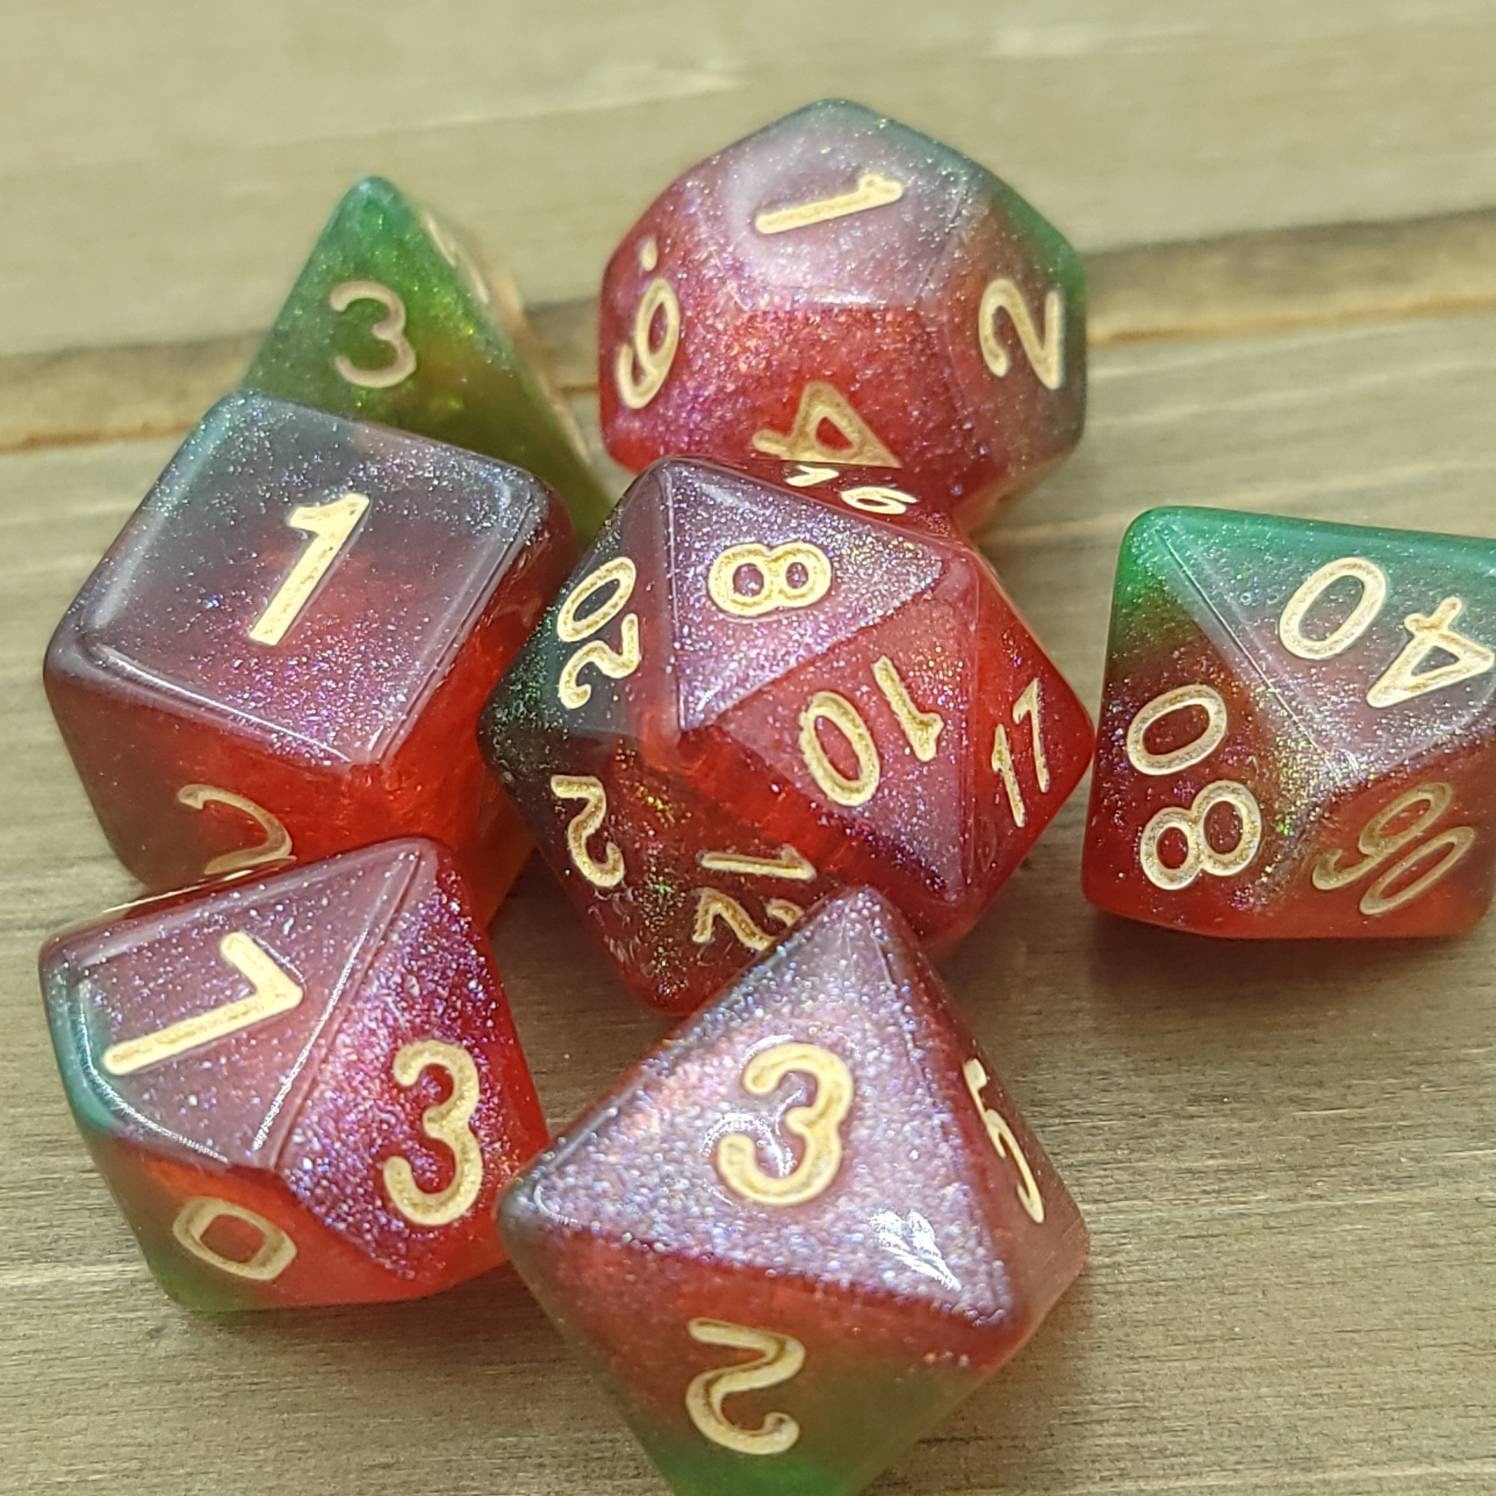 Strawberry Sparkle | RPG Dice Set| RPG Dice | Polyhedral Dice Set | Dungeons and Dragons | DnD Dice Set | Gaming Dice Set